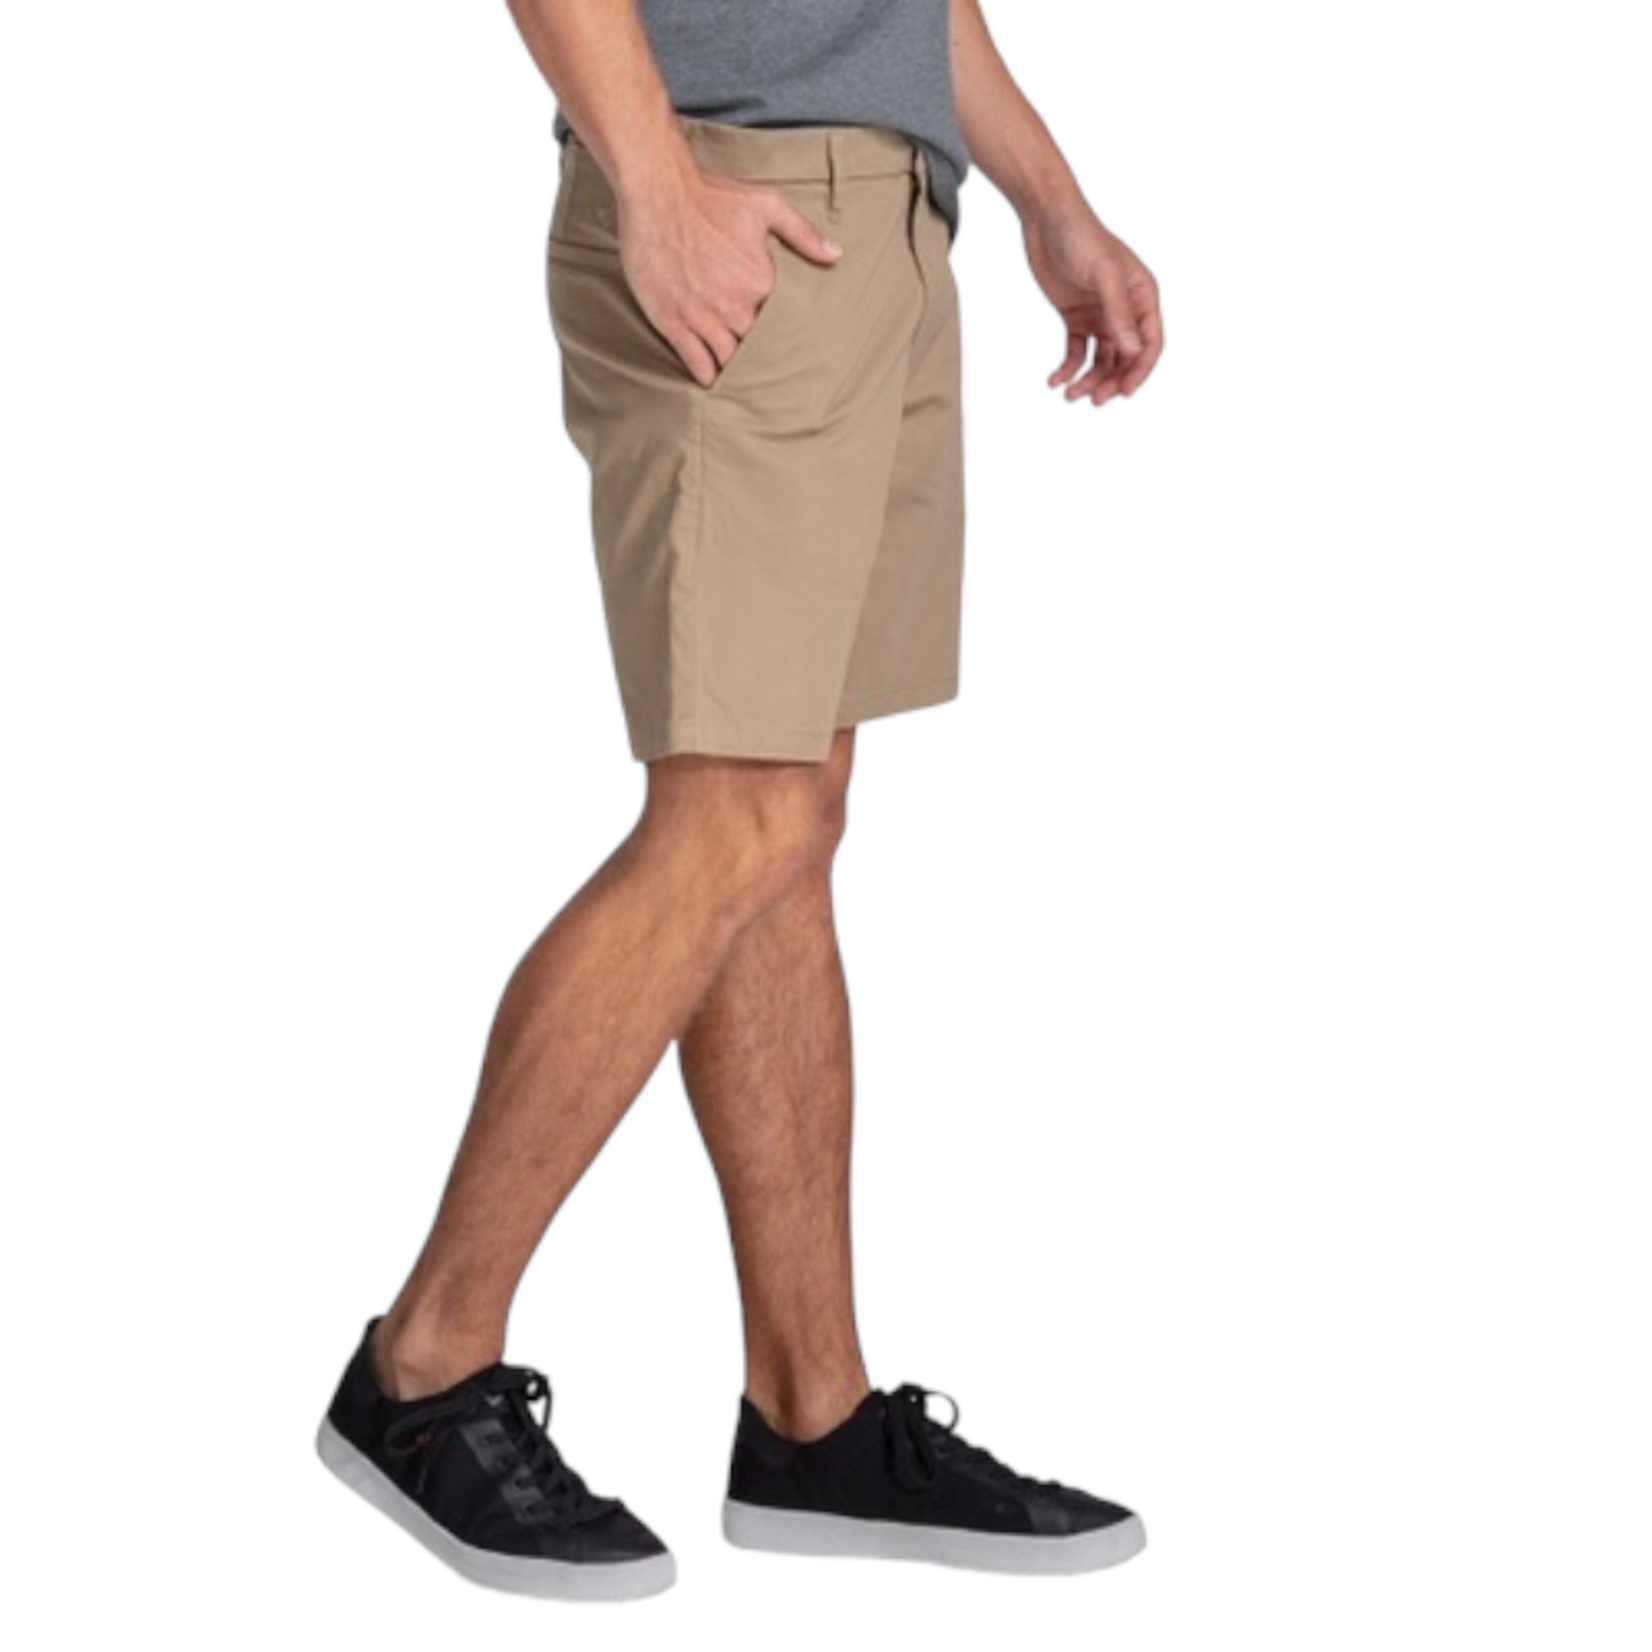 DOCKERS DOCKERS ULTIMATE STRAIGHT FIT SHORTS 85868-0000